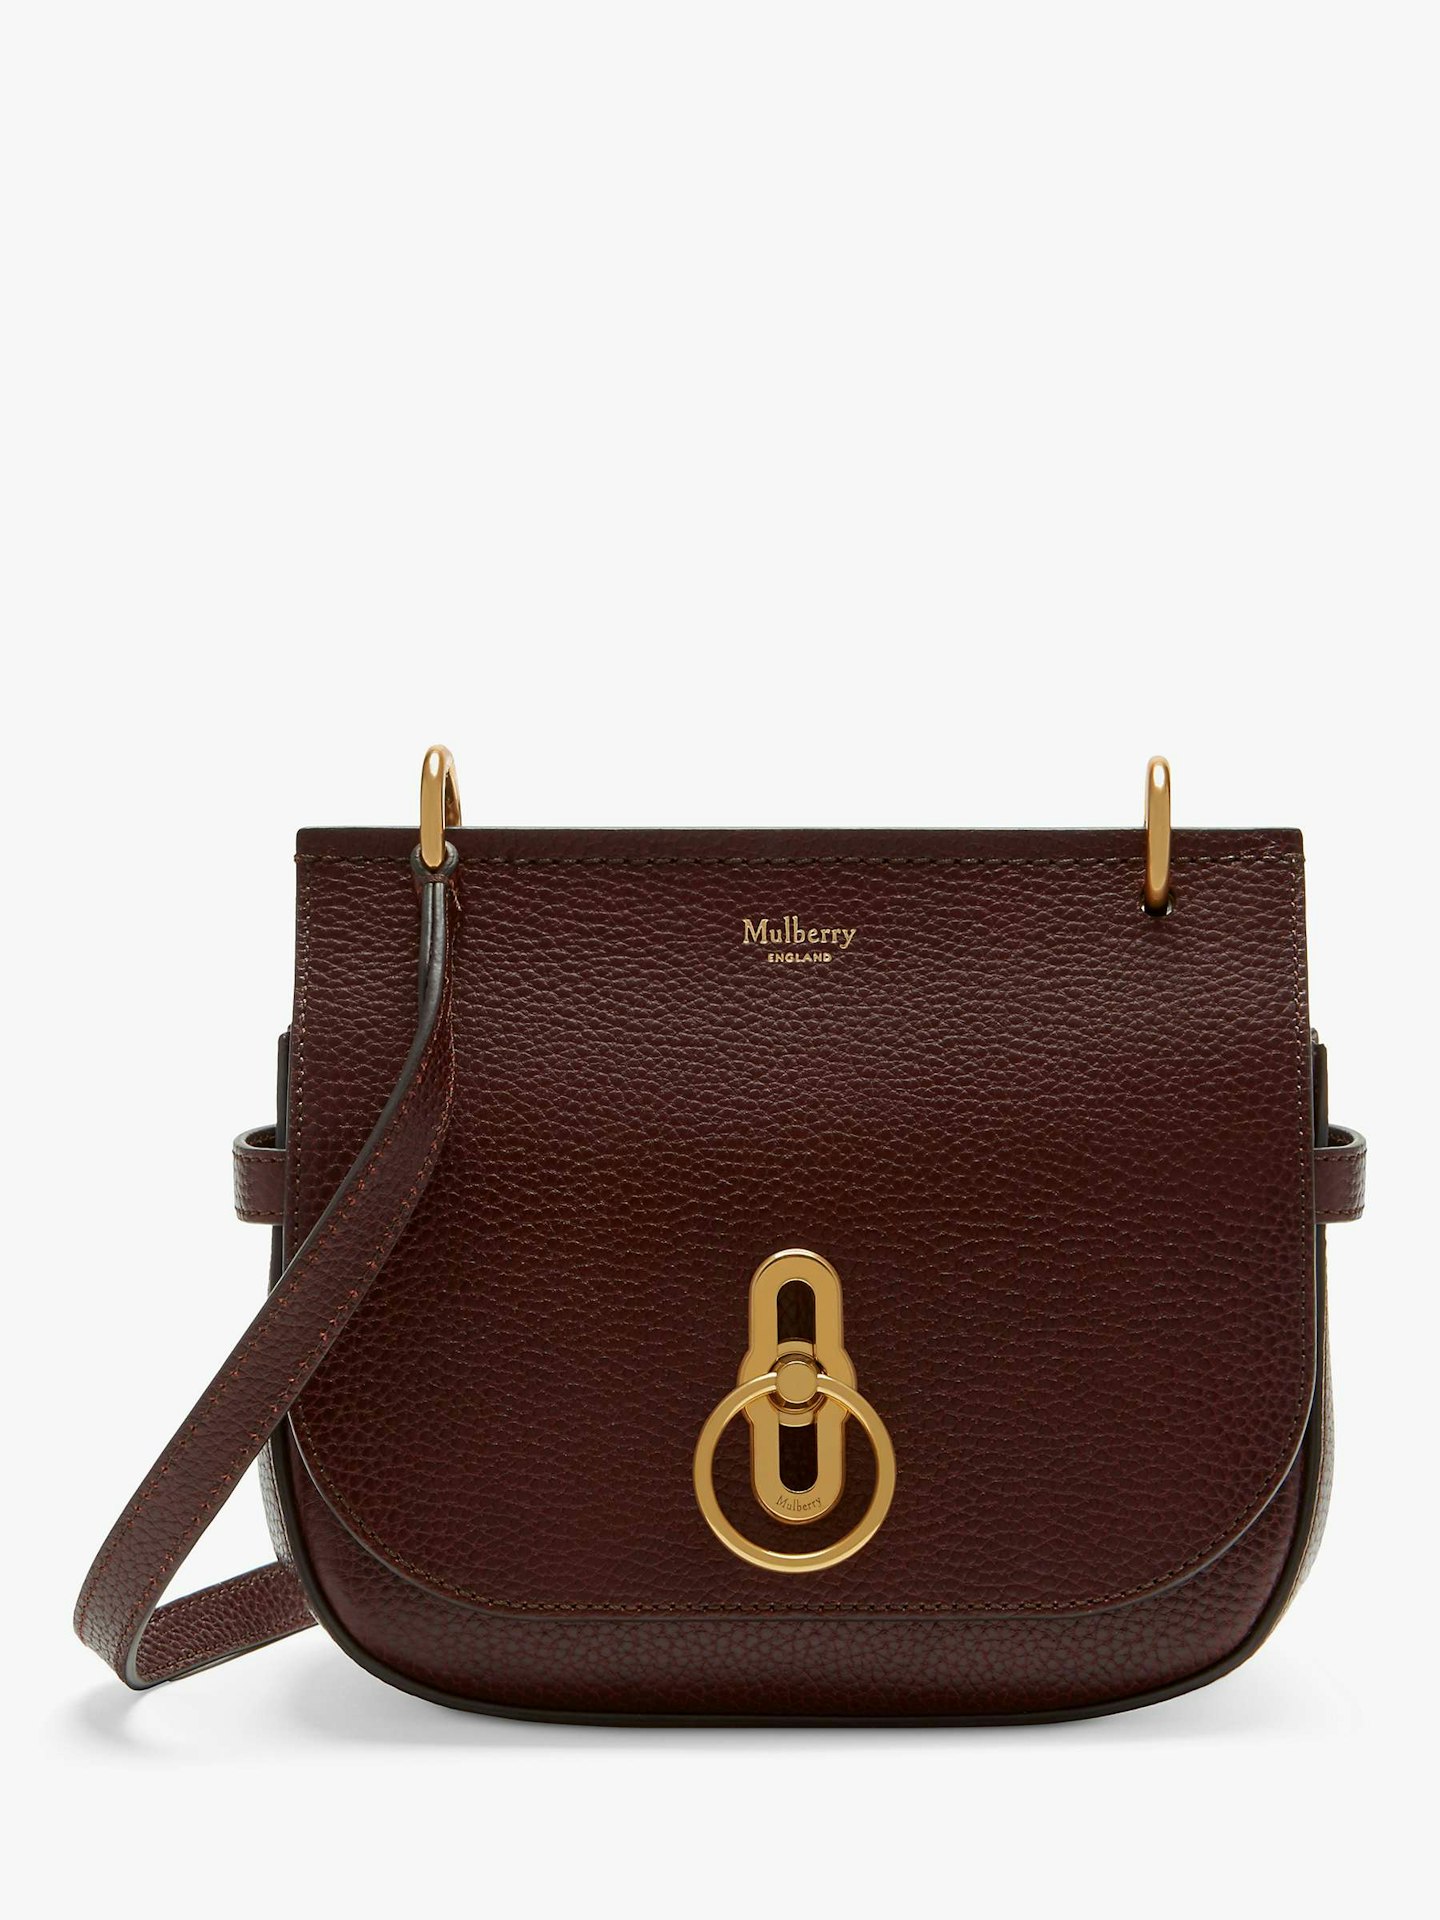 lunchtime shop  Friday  - Mulberry, Small Amberley Classic Classic Grain Leather Satchel Bag, Oxblood, £750